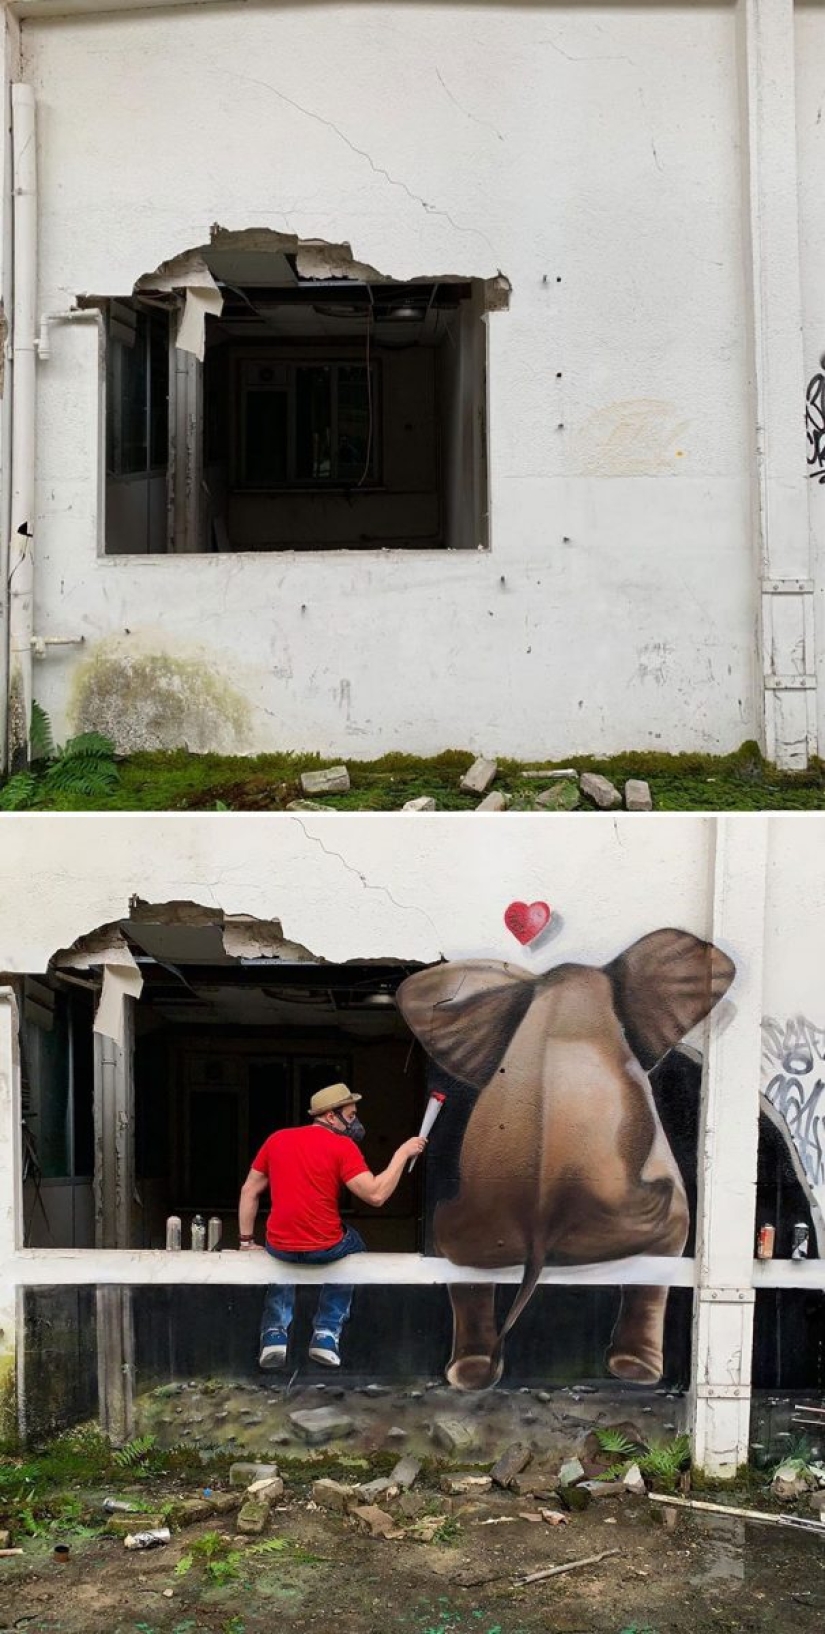 22 impressive SCAF graffiti that seem to jump out of the walls